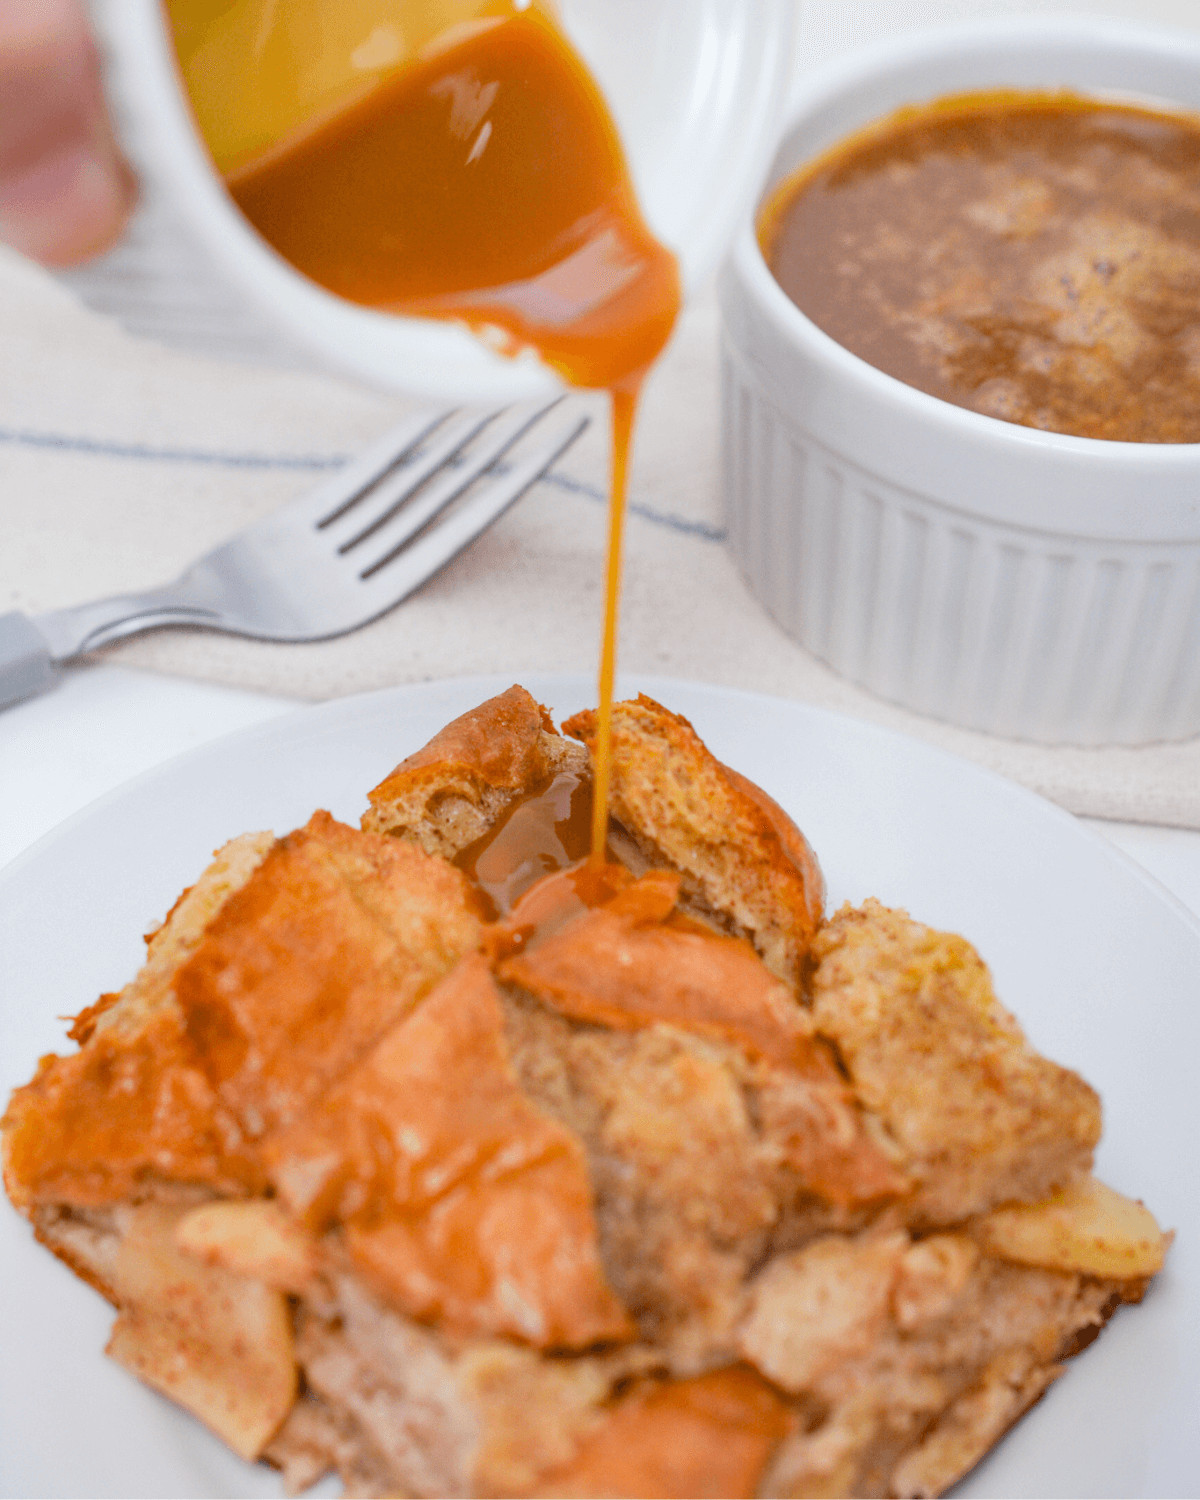 A drizzle of bourbon caramel sauce over the bread pudding.